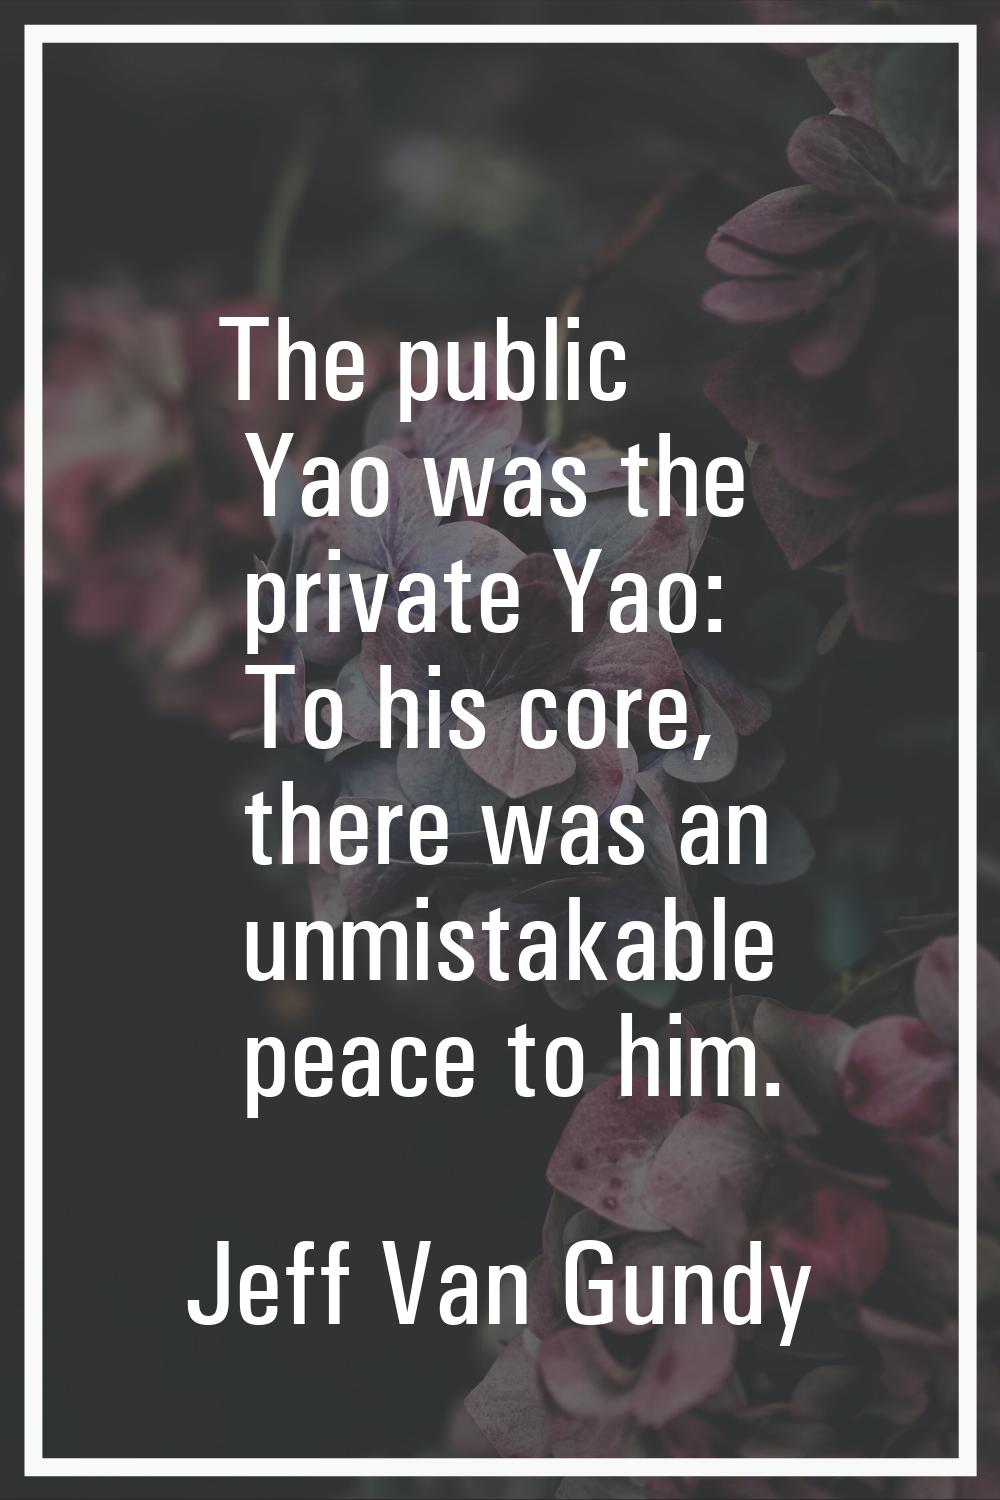 The public Yao was the private Yao: To his core, there was an unmistakable peace to him.